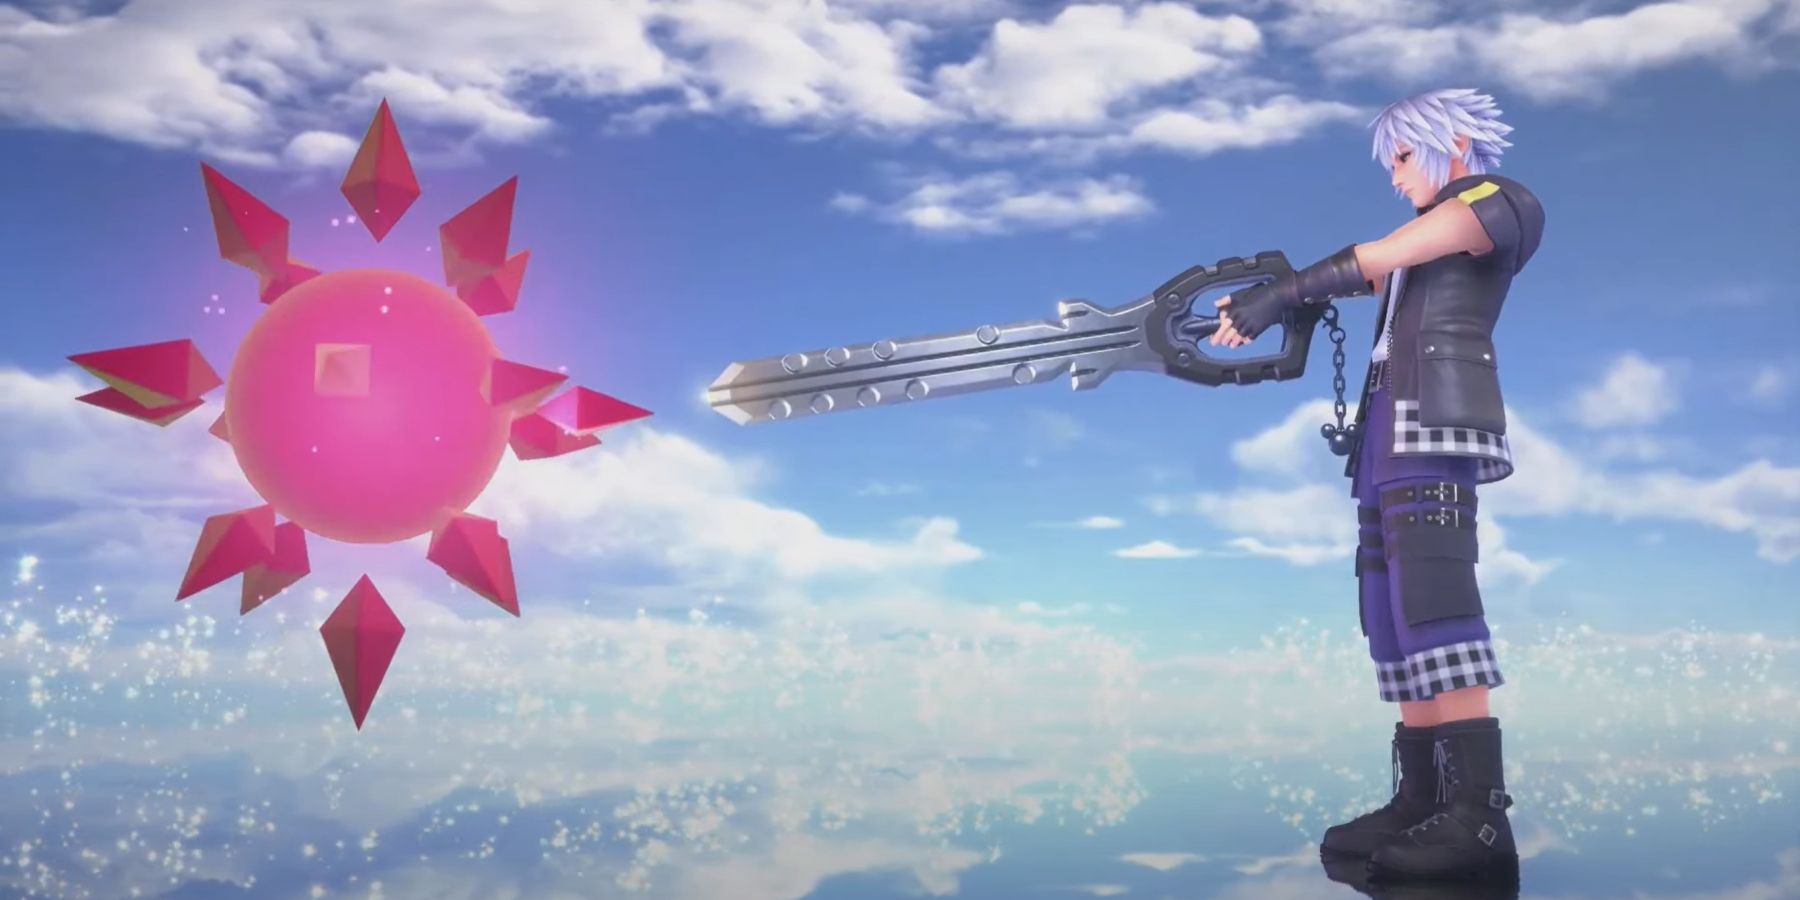 a young man in a black jacket with blue and white checkerd shirt and pants raises a blade shaped like a car key to a pink orb with diamonds floating around it. there's blue sky and clouds above him and they're reflected in the ground below